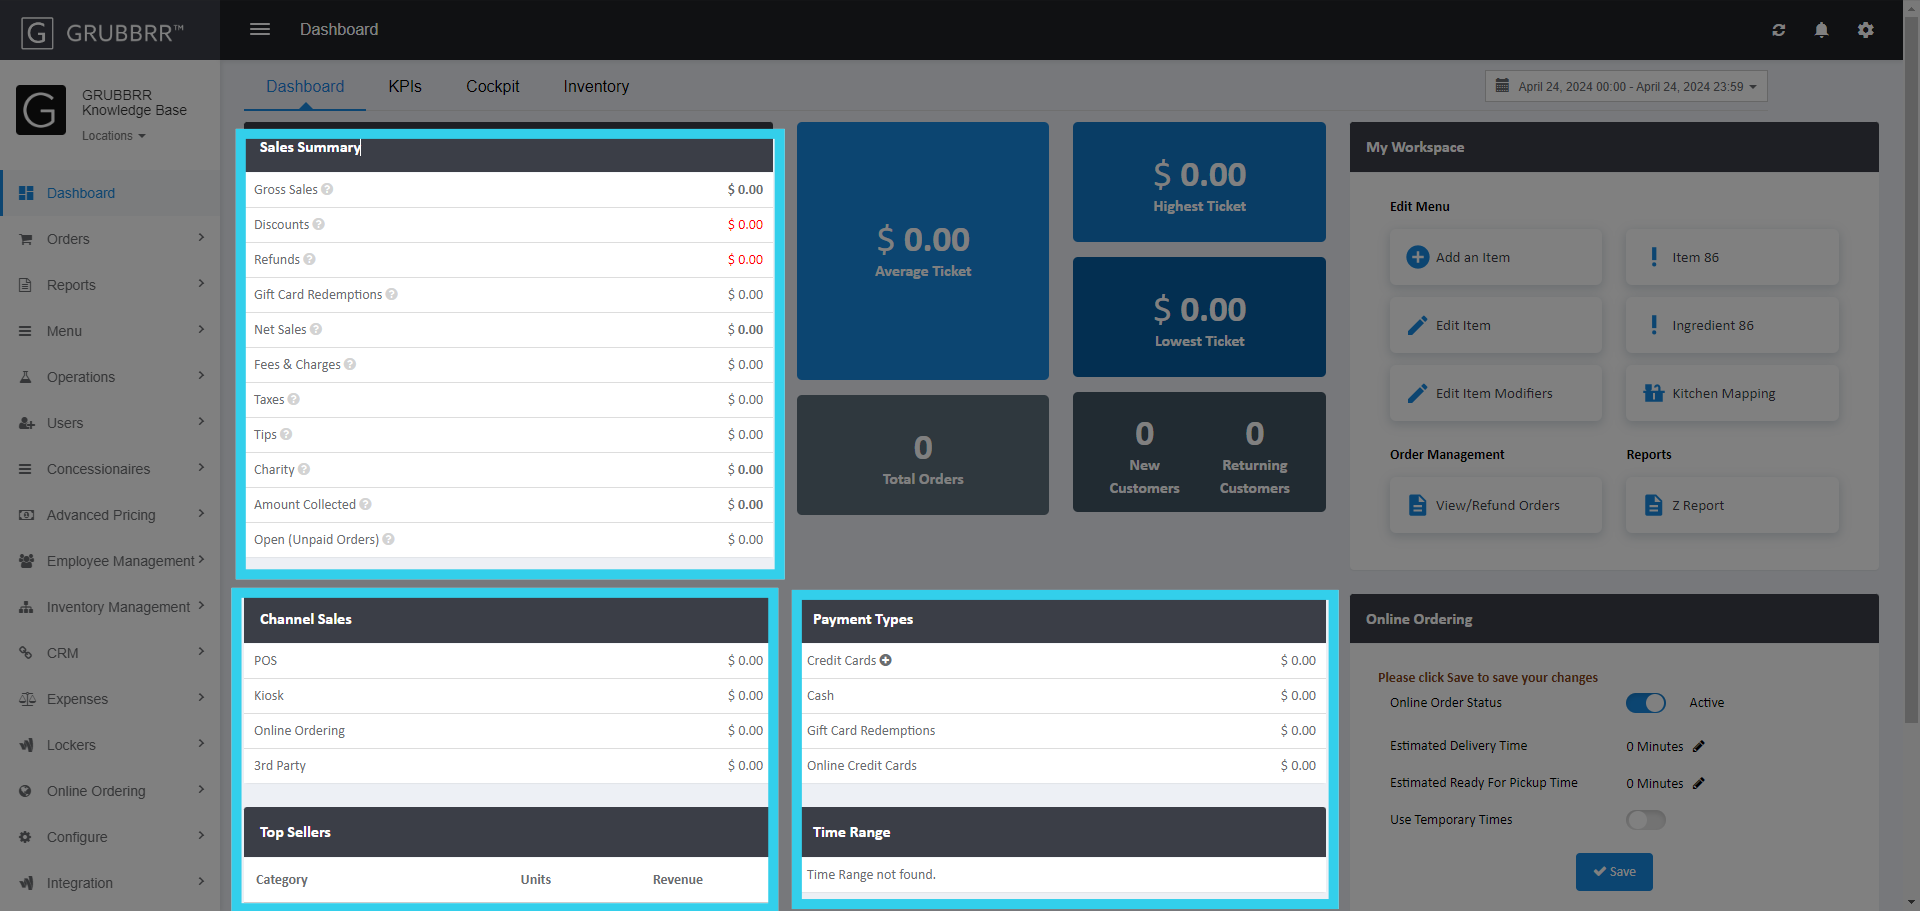 The Location Dashboard shows high-level reports for Sales, Item Mix, Payment Types, and more